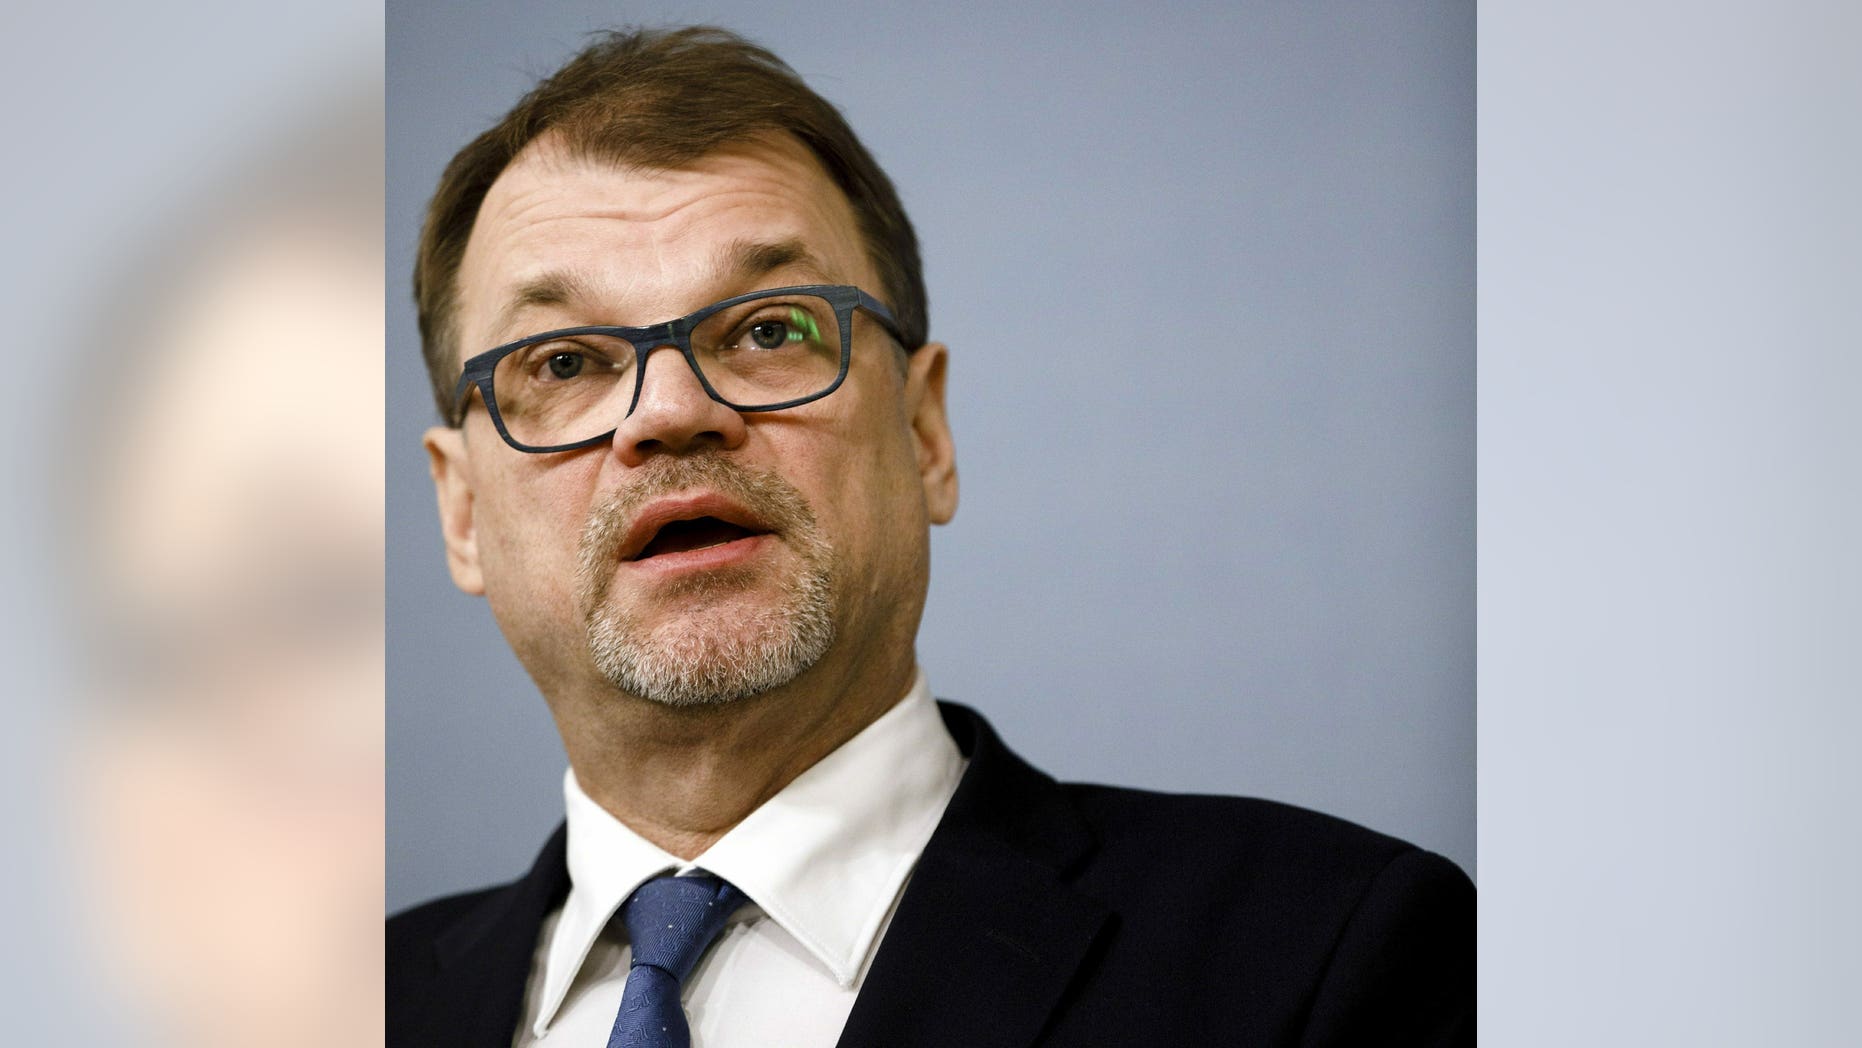 Finnish Prime Minister Juha Sipila announces his cabinet's resignation in a press conference at the prime minister's official residence Kes'ranta in Helsinki, Finland, Friday, March 8, 2019. Sipila's center-right government resigned Friday after failing to push through a planned social and health reform.